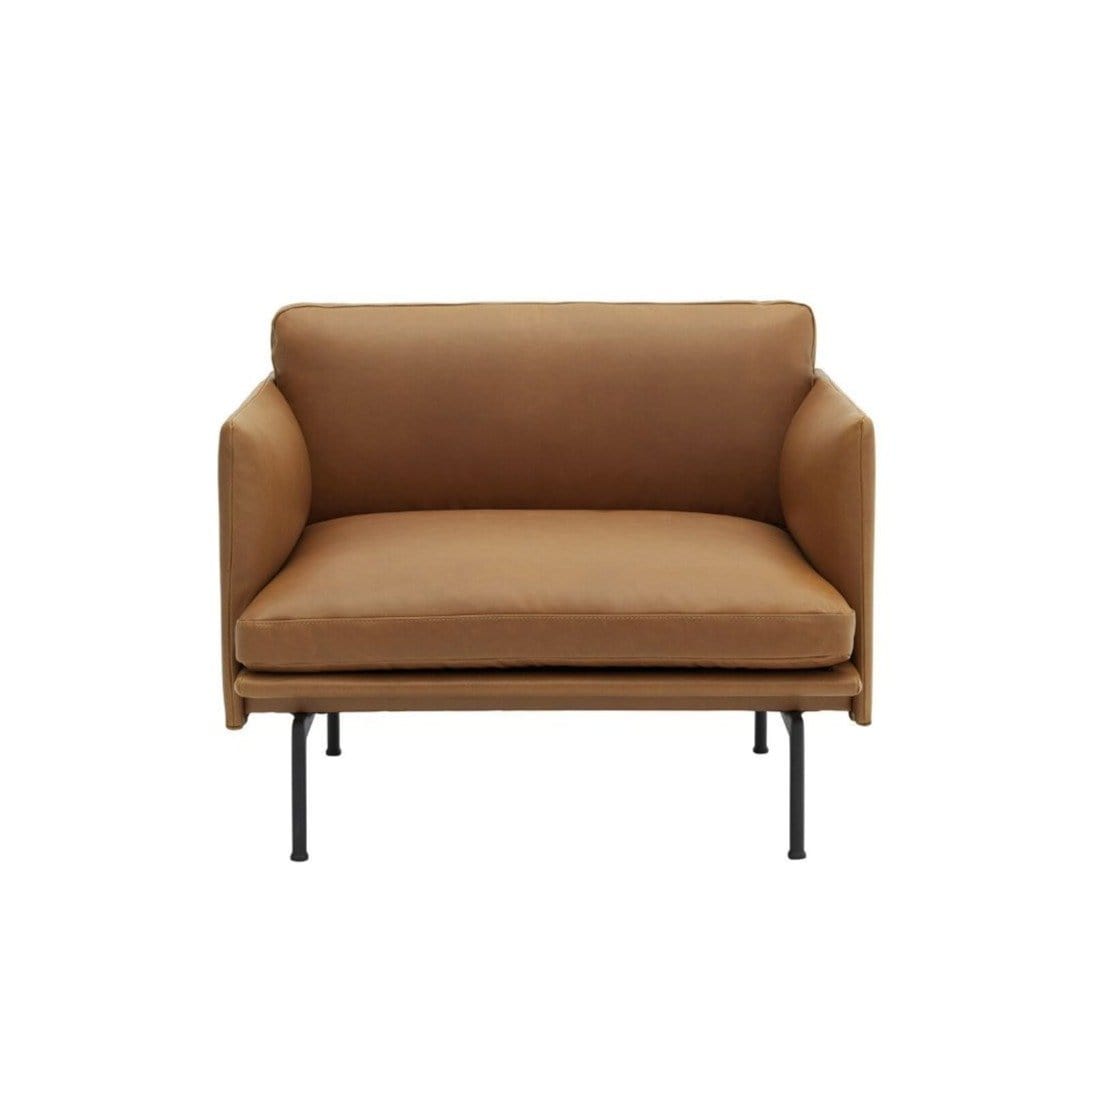 muuto outline chair cognac refined leather available at someday designs. #colour_cognac-refine-leather